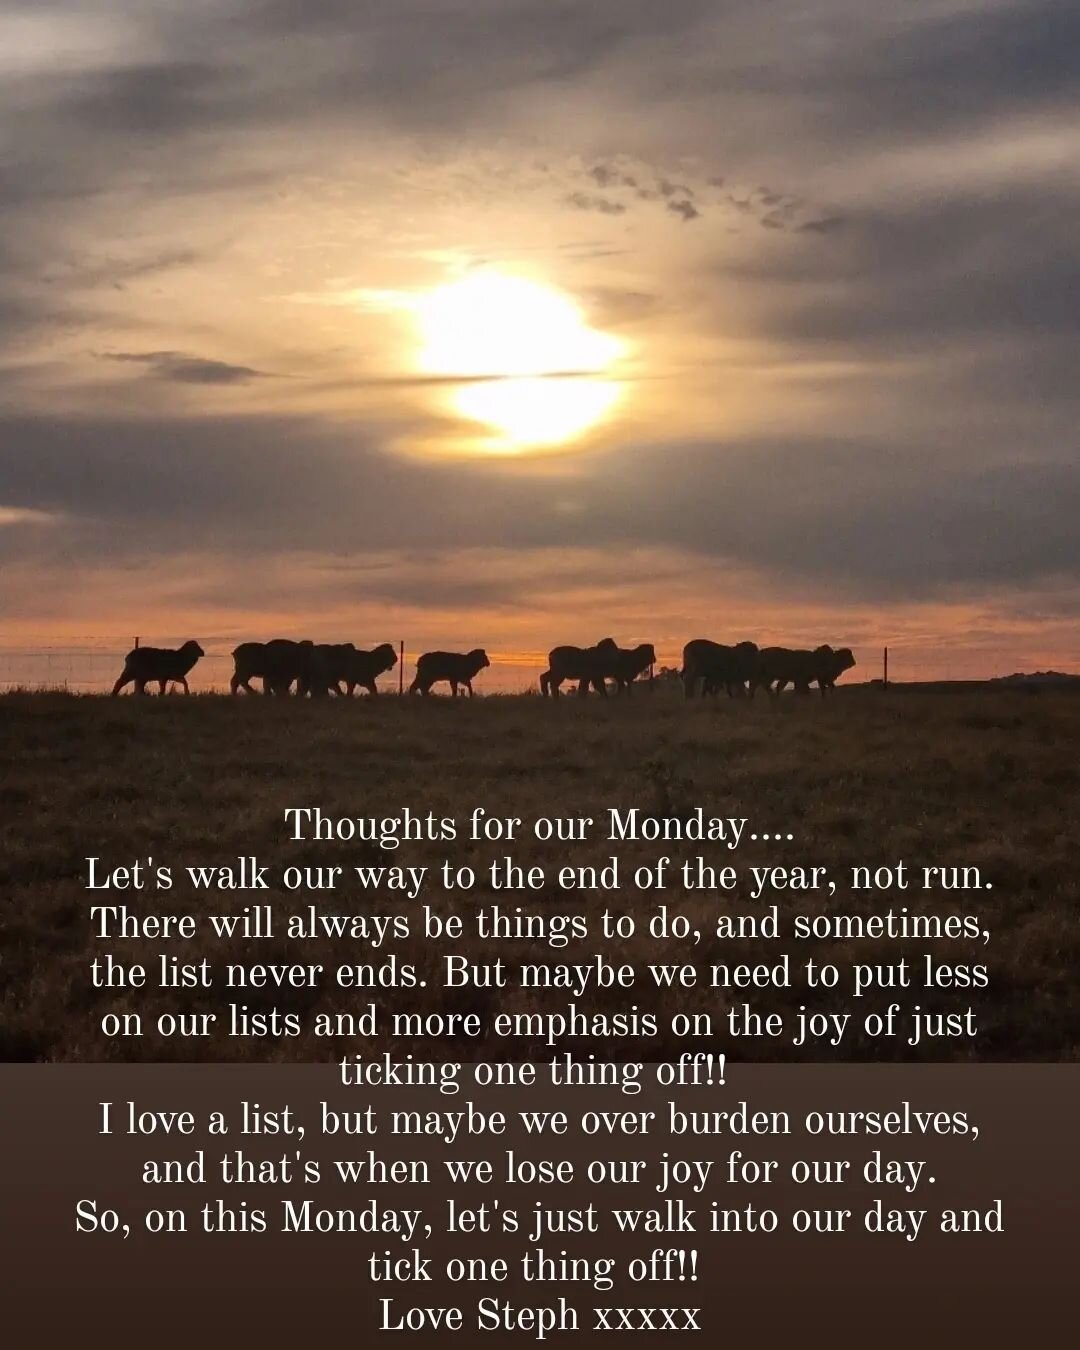 Thoughts for our Monday....
Let's walk our way to the end of the year, not run.
There will always be things to do, and sometimes, the list never ends. But maybe we need to put less on our lists and more emphasis on the joy of just ticking one thing o